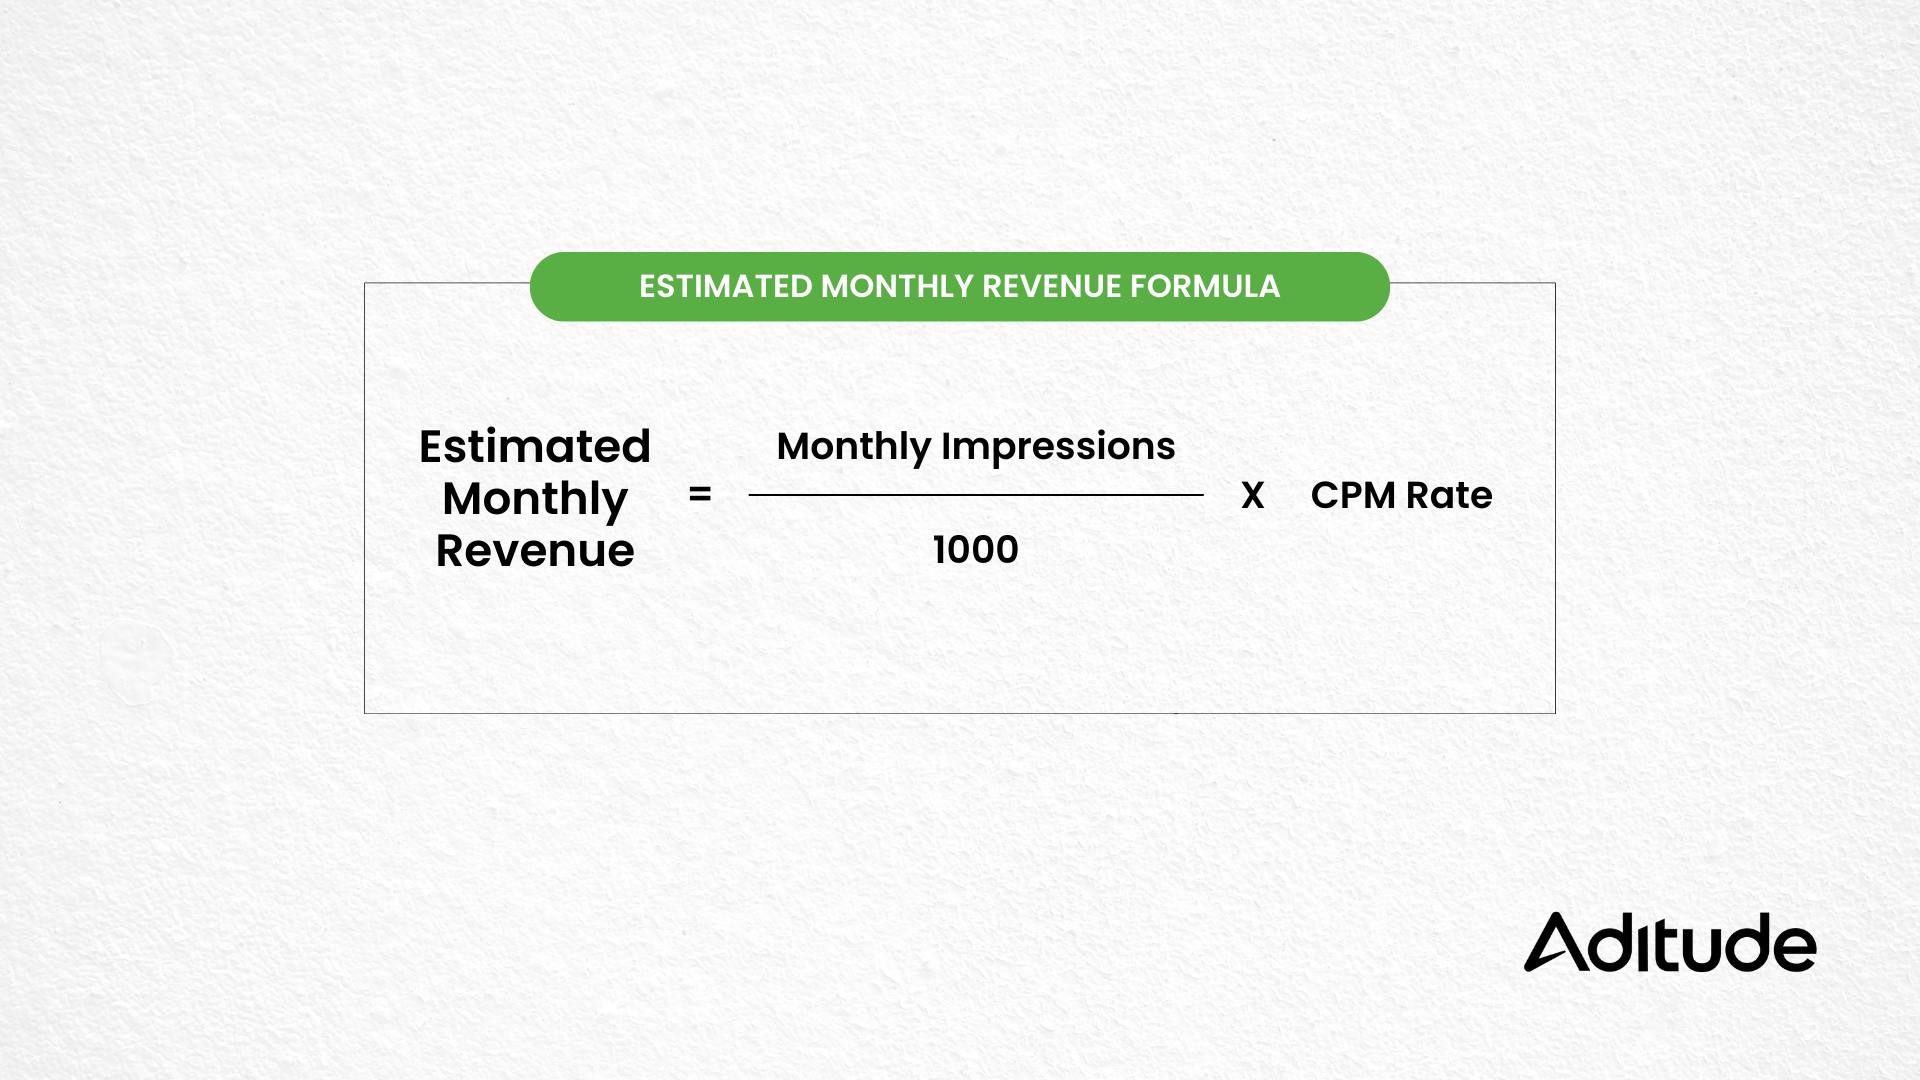 Estimated Monthly Revenue equals Monthly Impressions divided by 1000 multiplied by CPM Rate